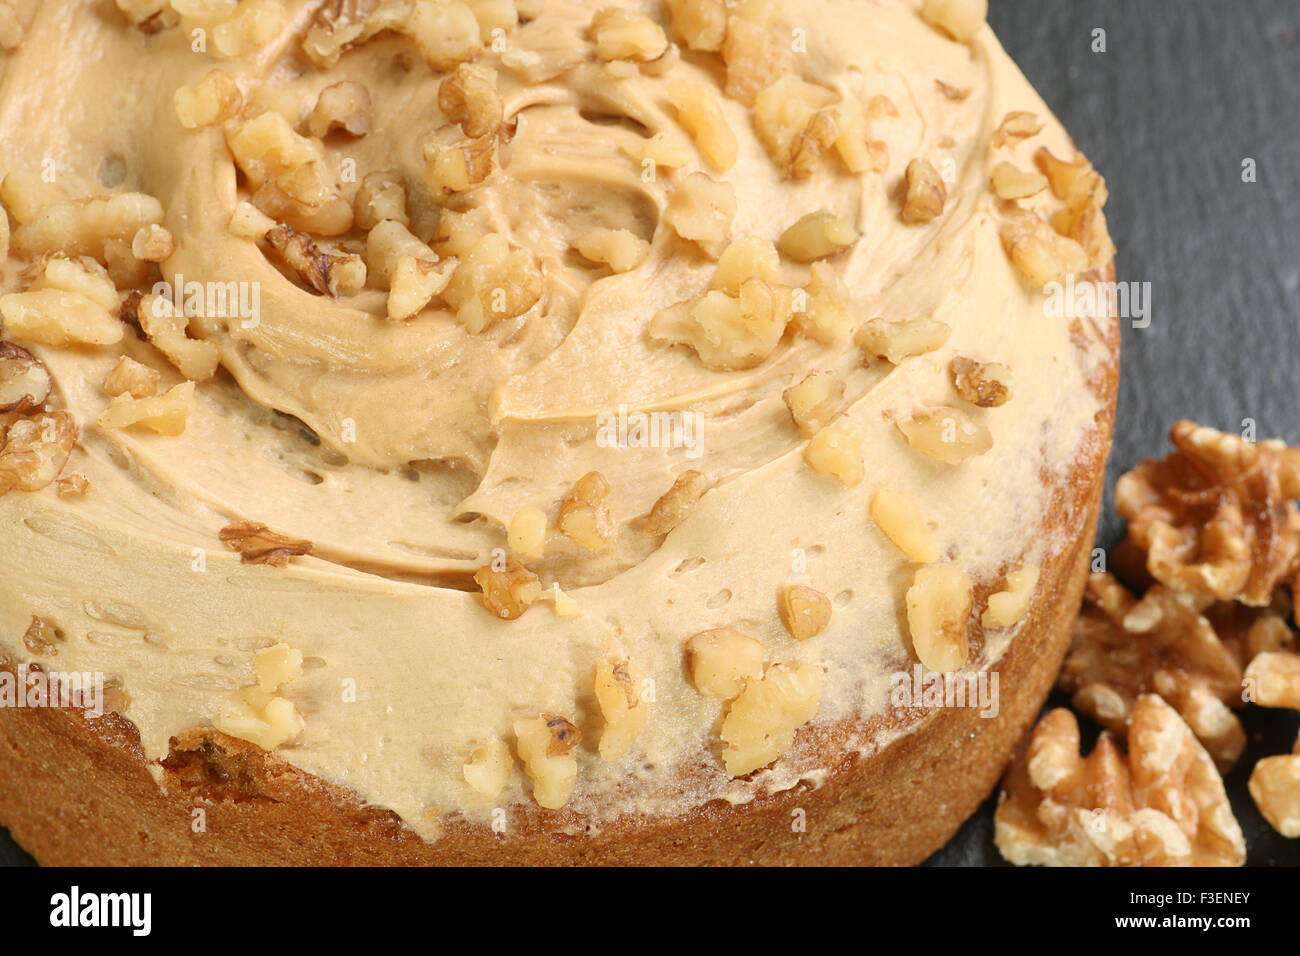 whole walnut and coffee cake with butter icing Stock Photo